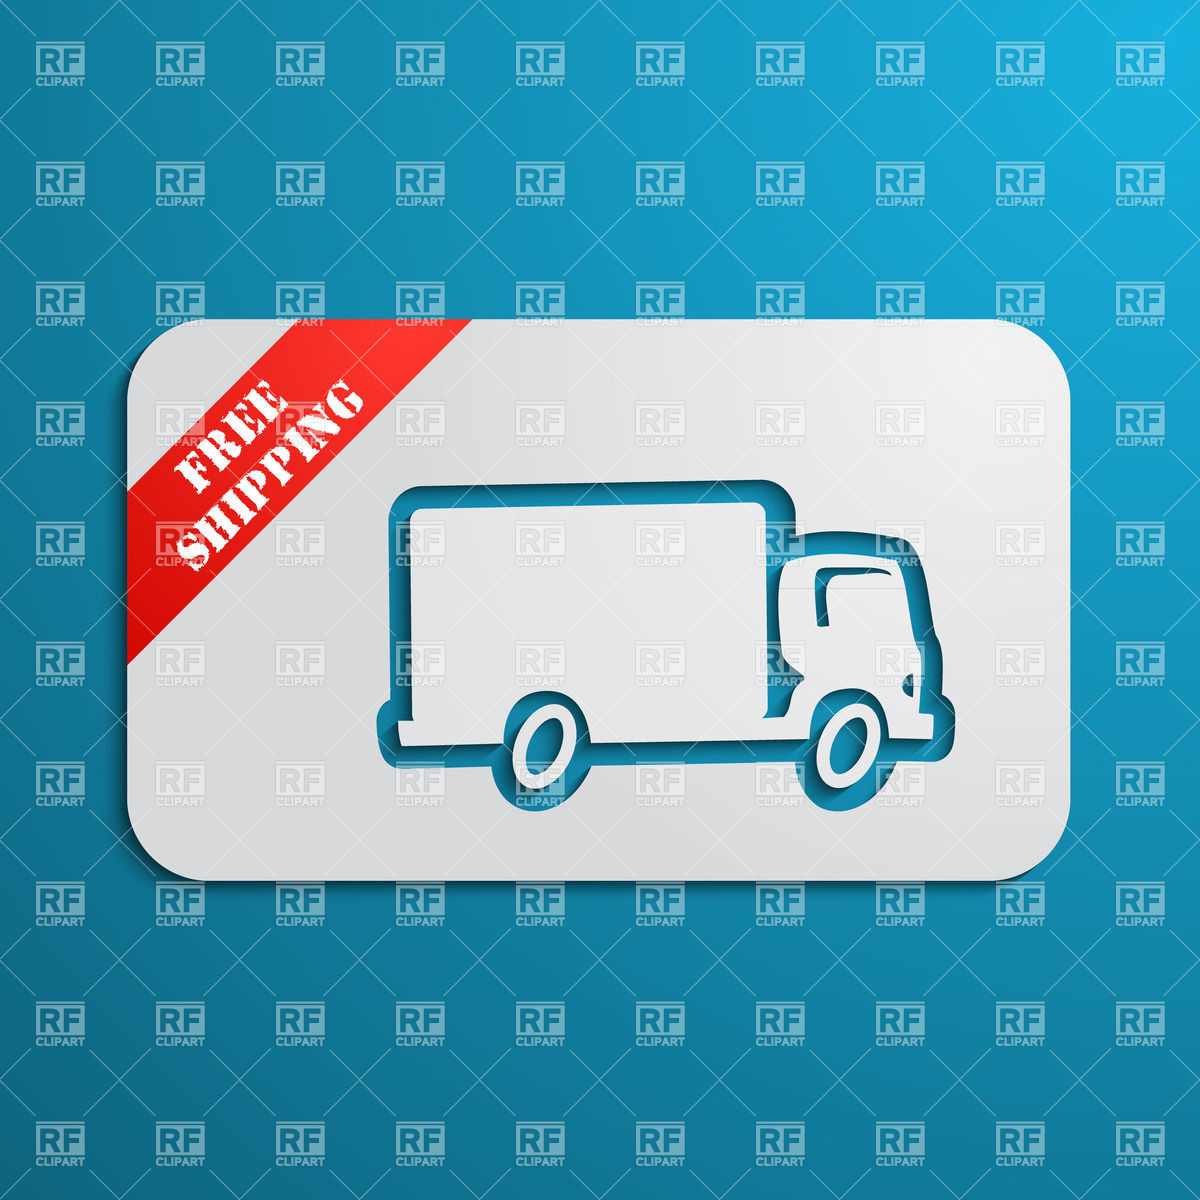 Free Shipping   Silhouette Of Delivery Truck On Label With Red Corner